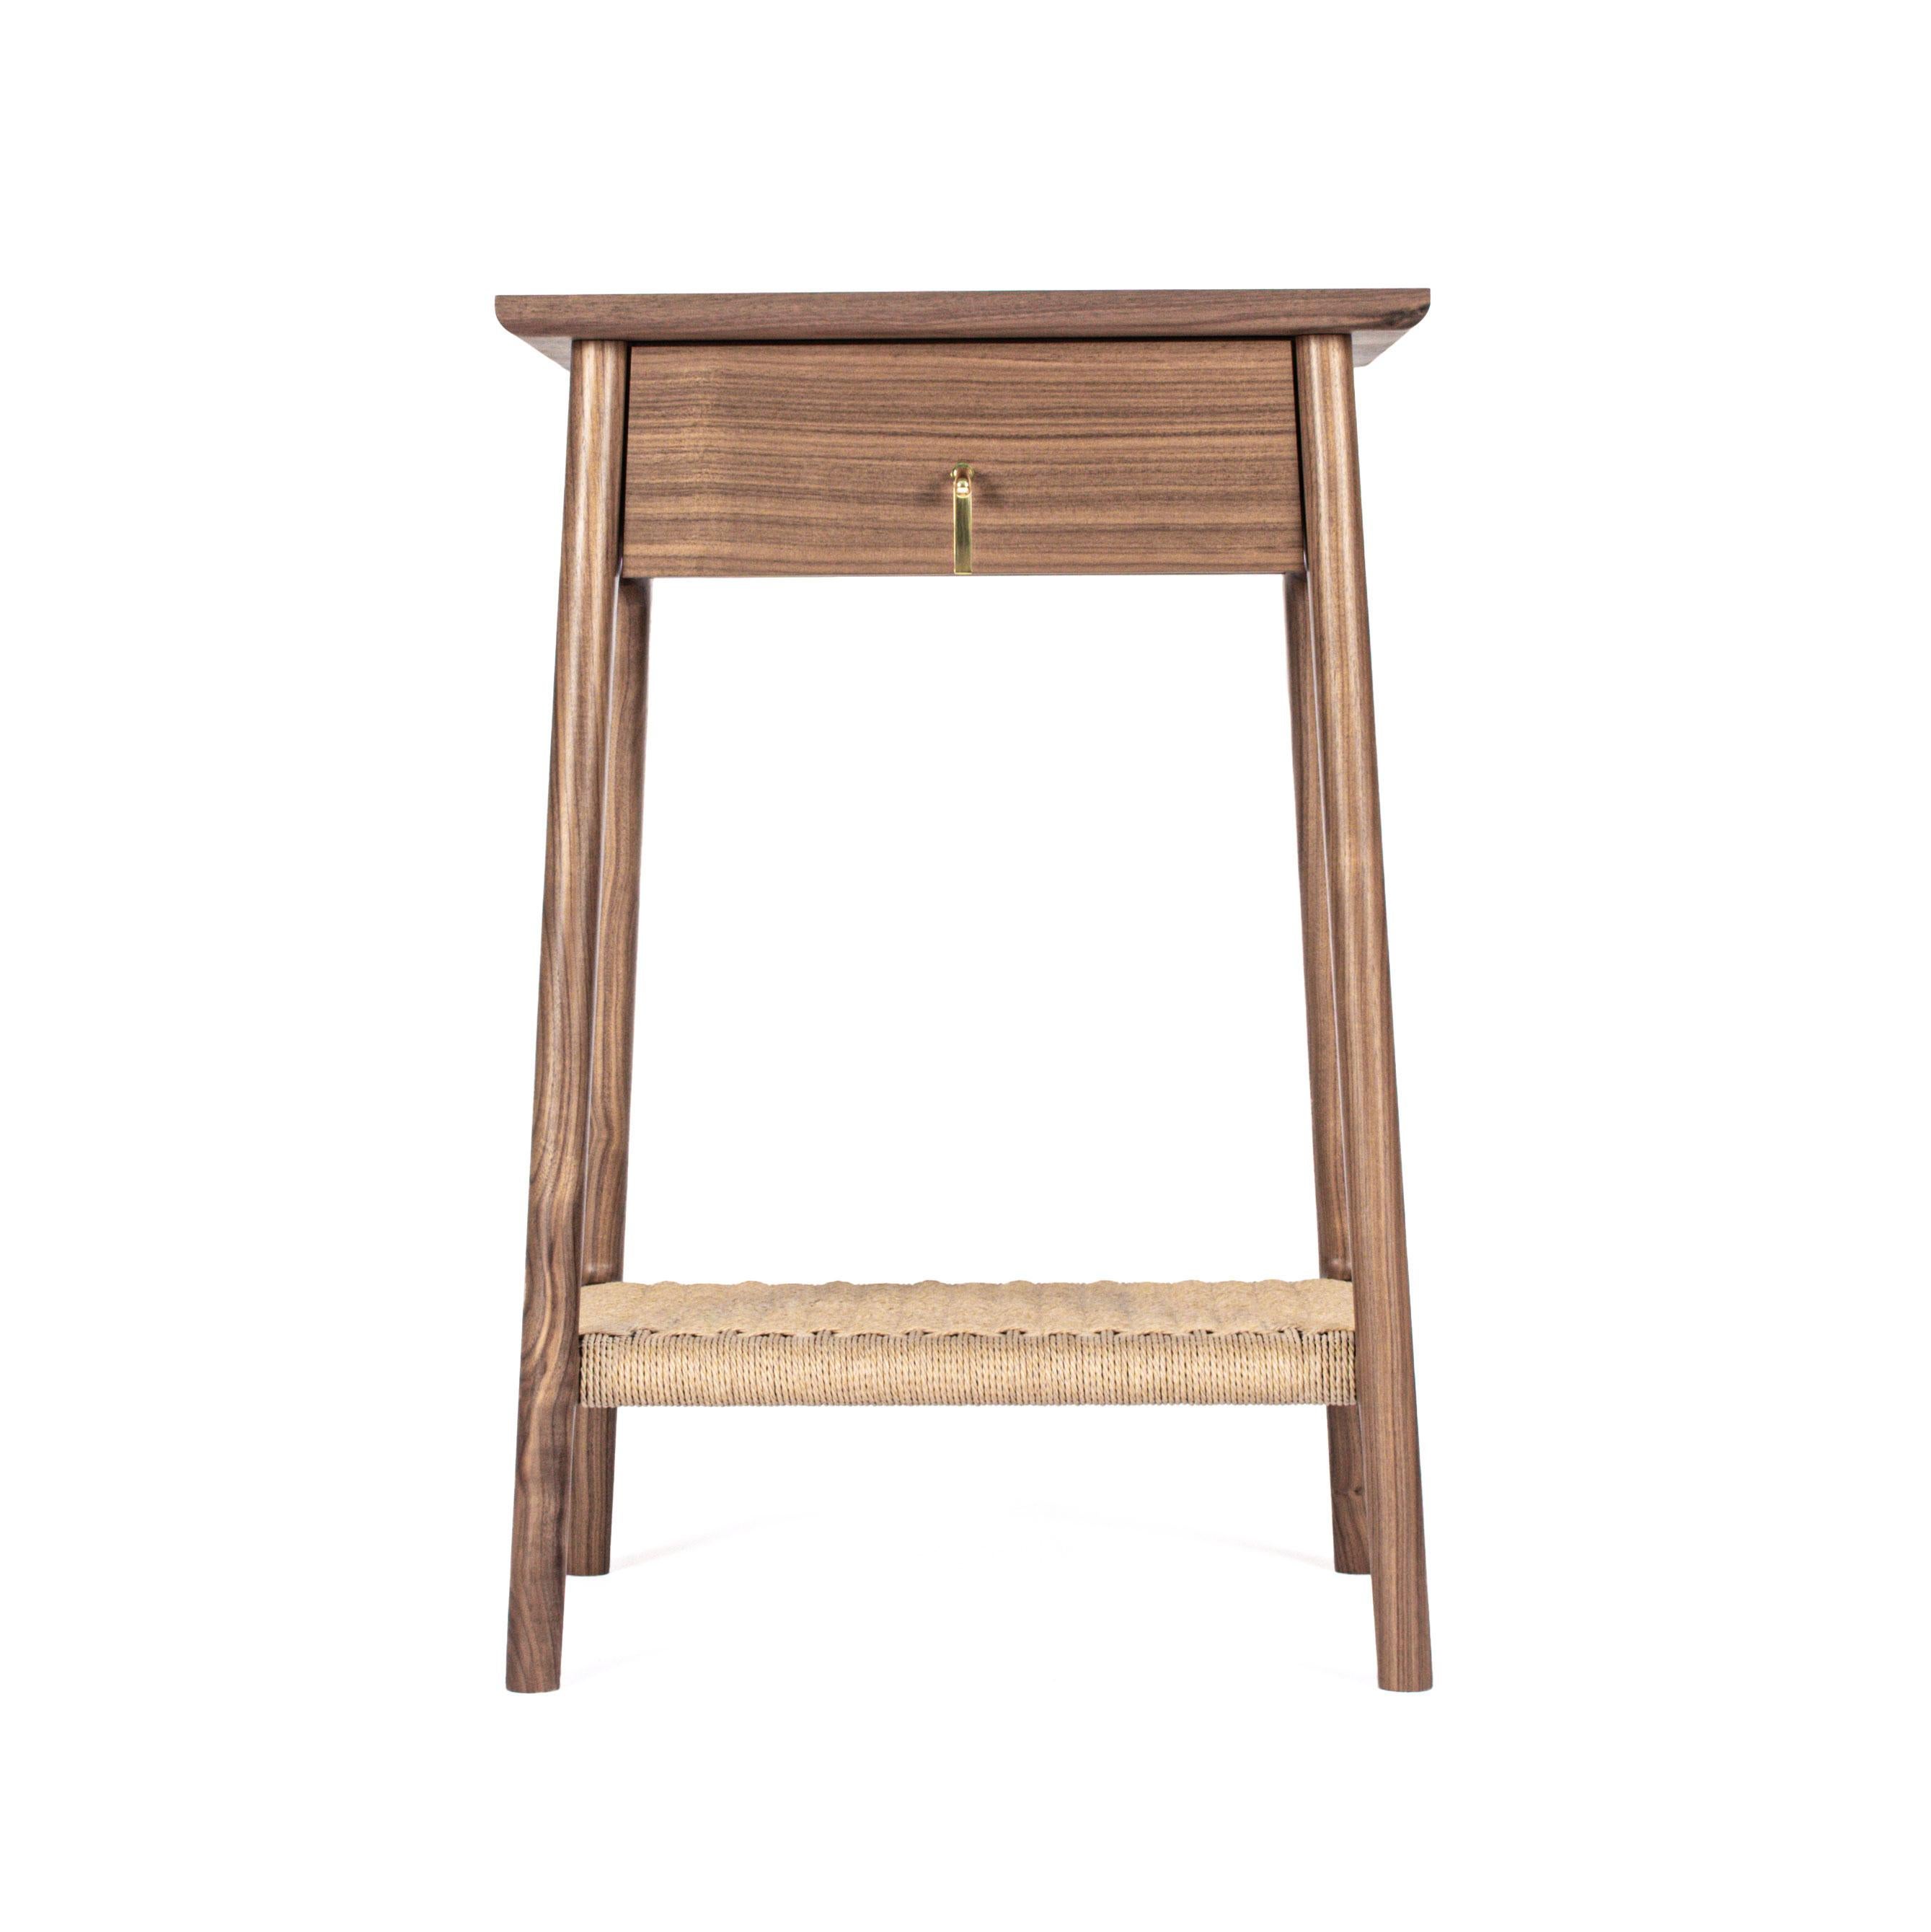 Hardwood bedside table with a drawer and a woven Danish Cord undercarriage. The custom brass pull is inspired by nature, the California Quail topknot. Can be made with or without the woven undercarriage. Feature changes as well as dimensional